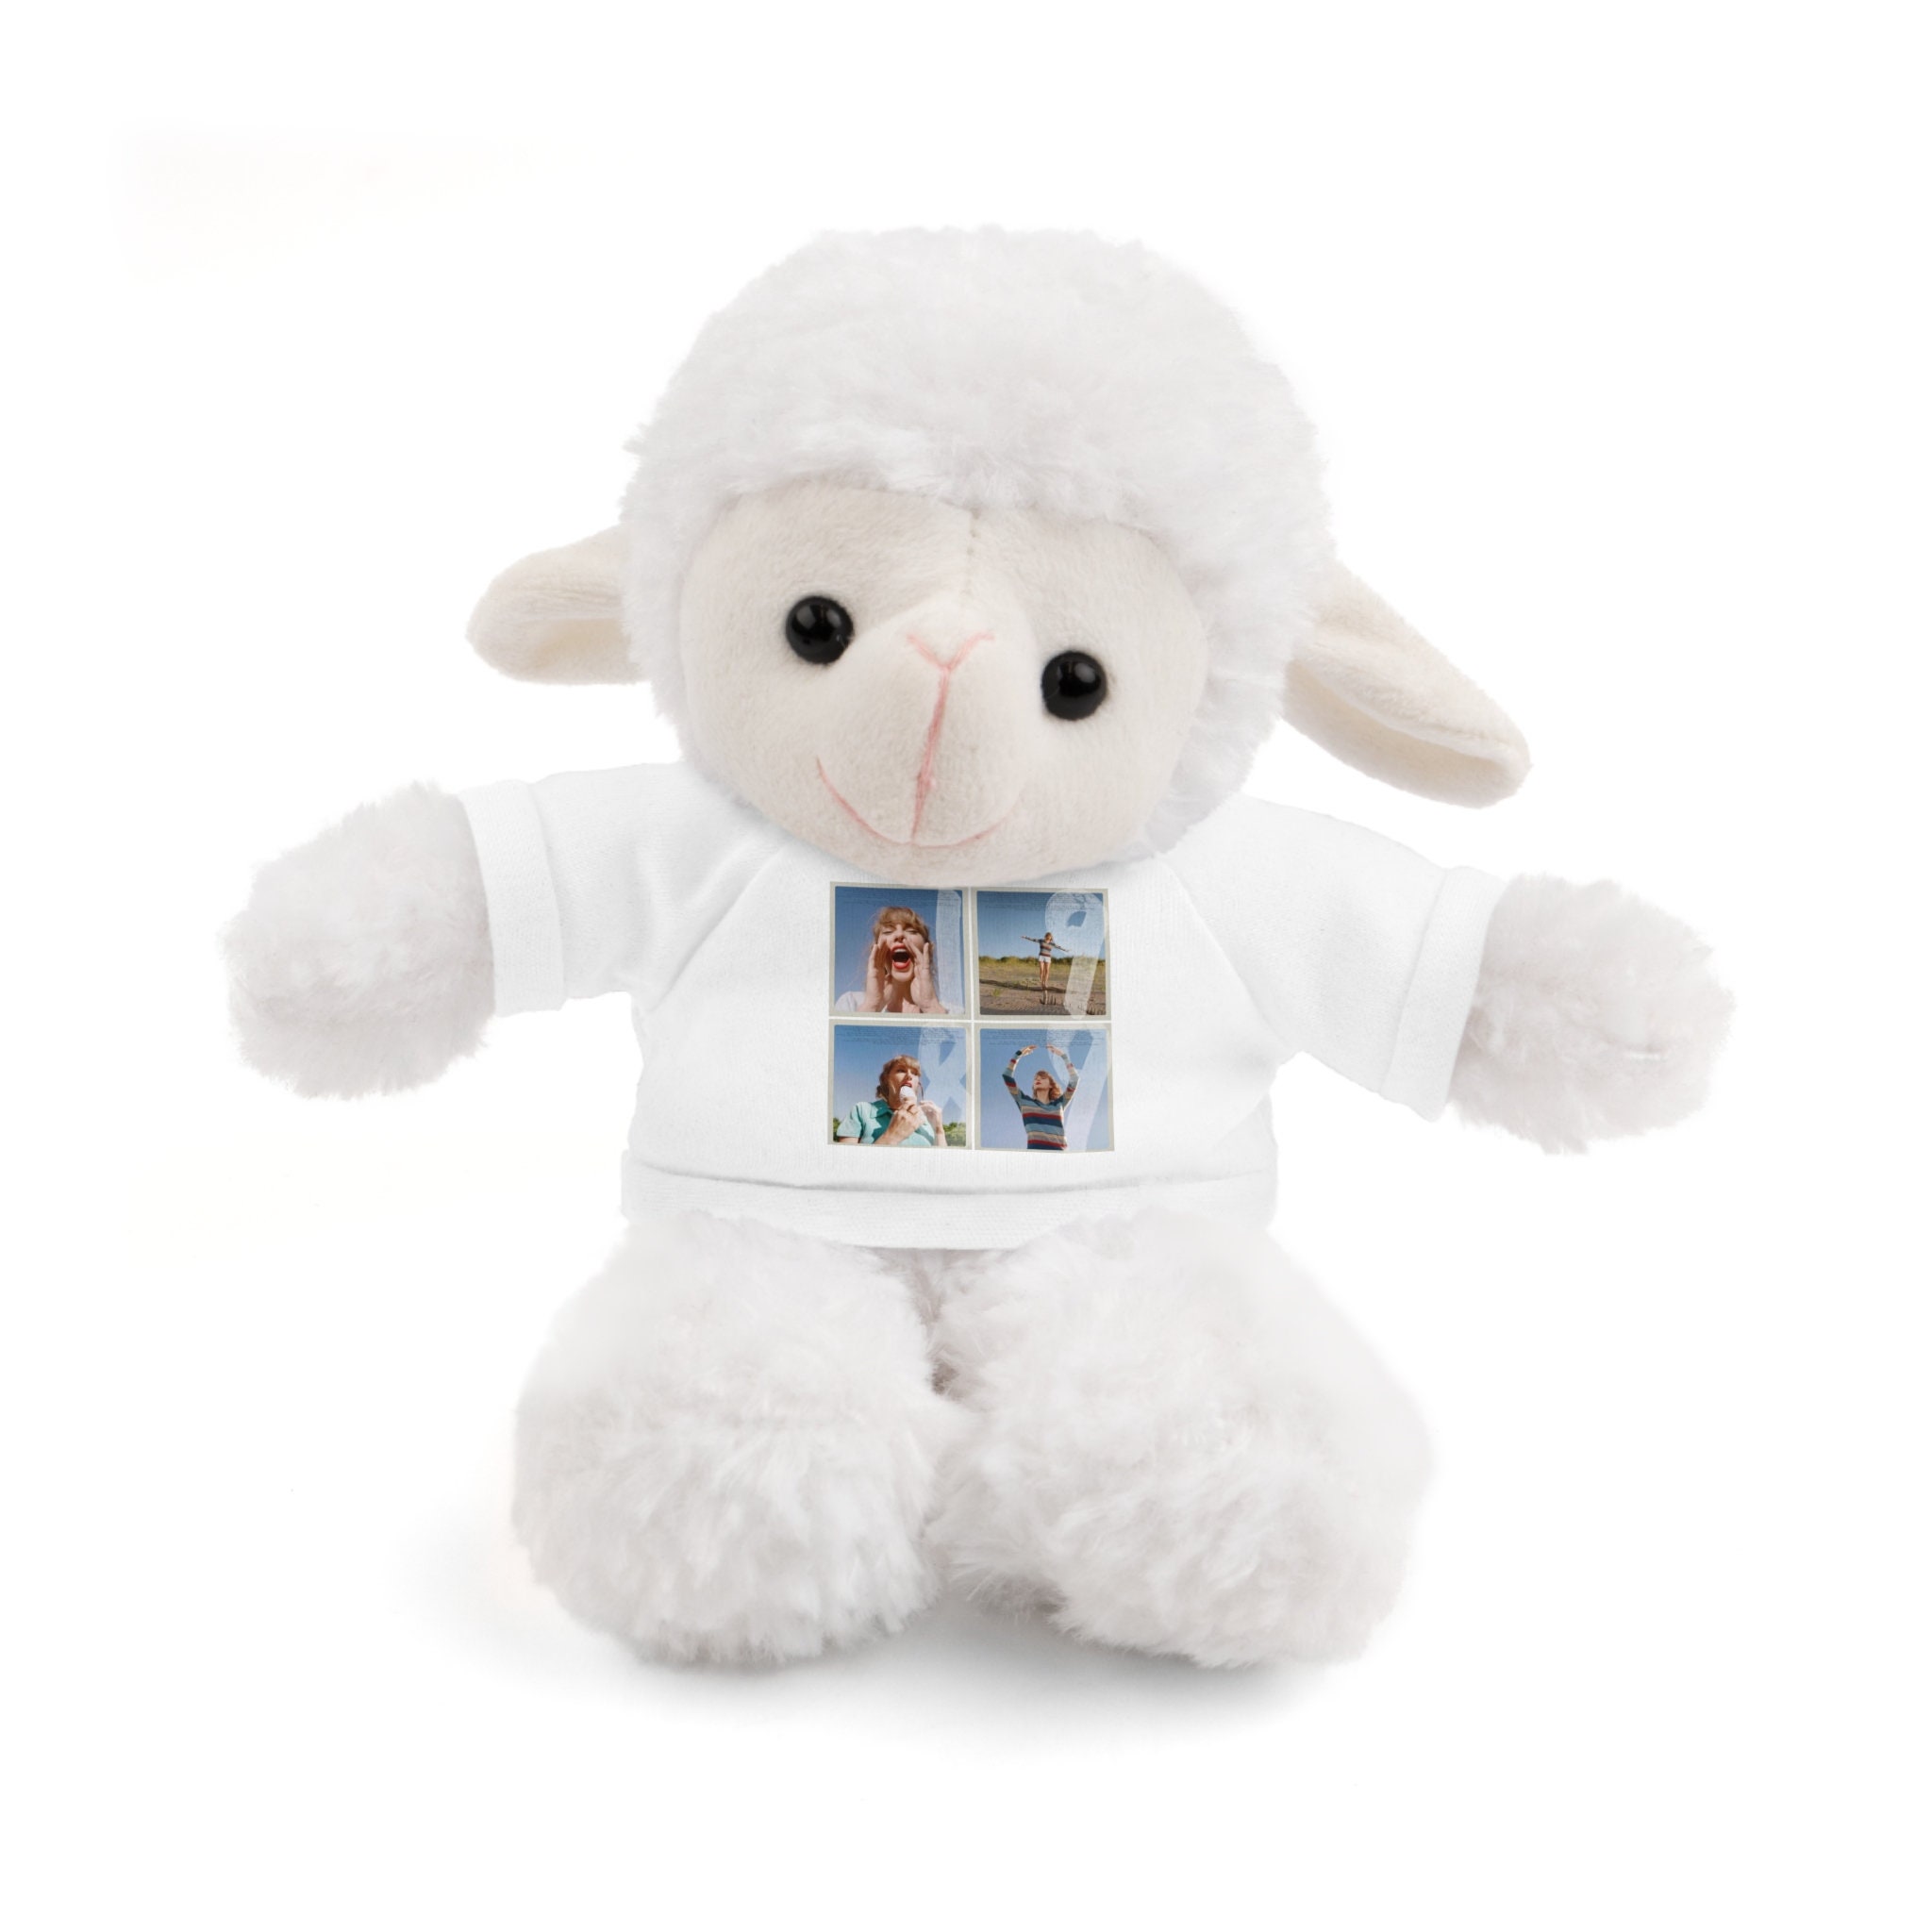 Taylor Swift 1989 Stuffed Animals With Tee - https